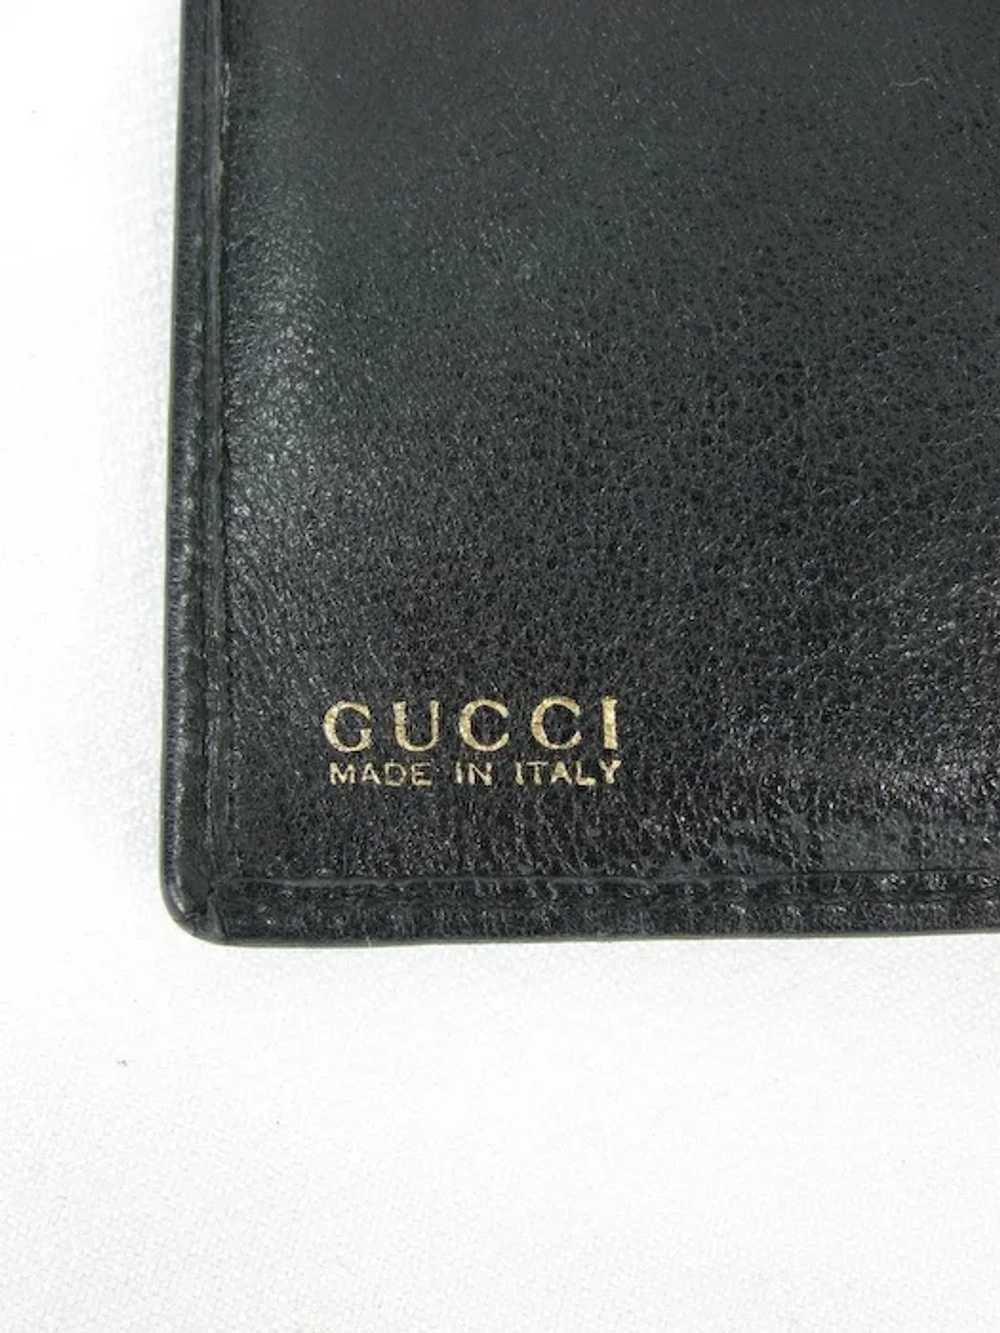 Gucci Black Leather & Bamboo Continental Wallet - image 3